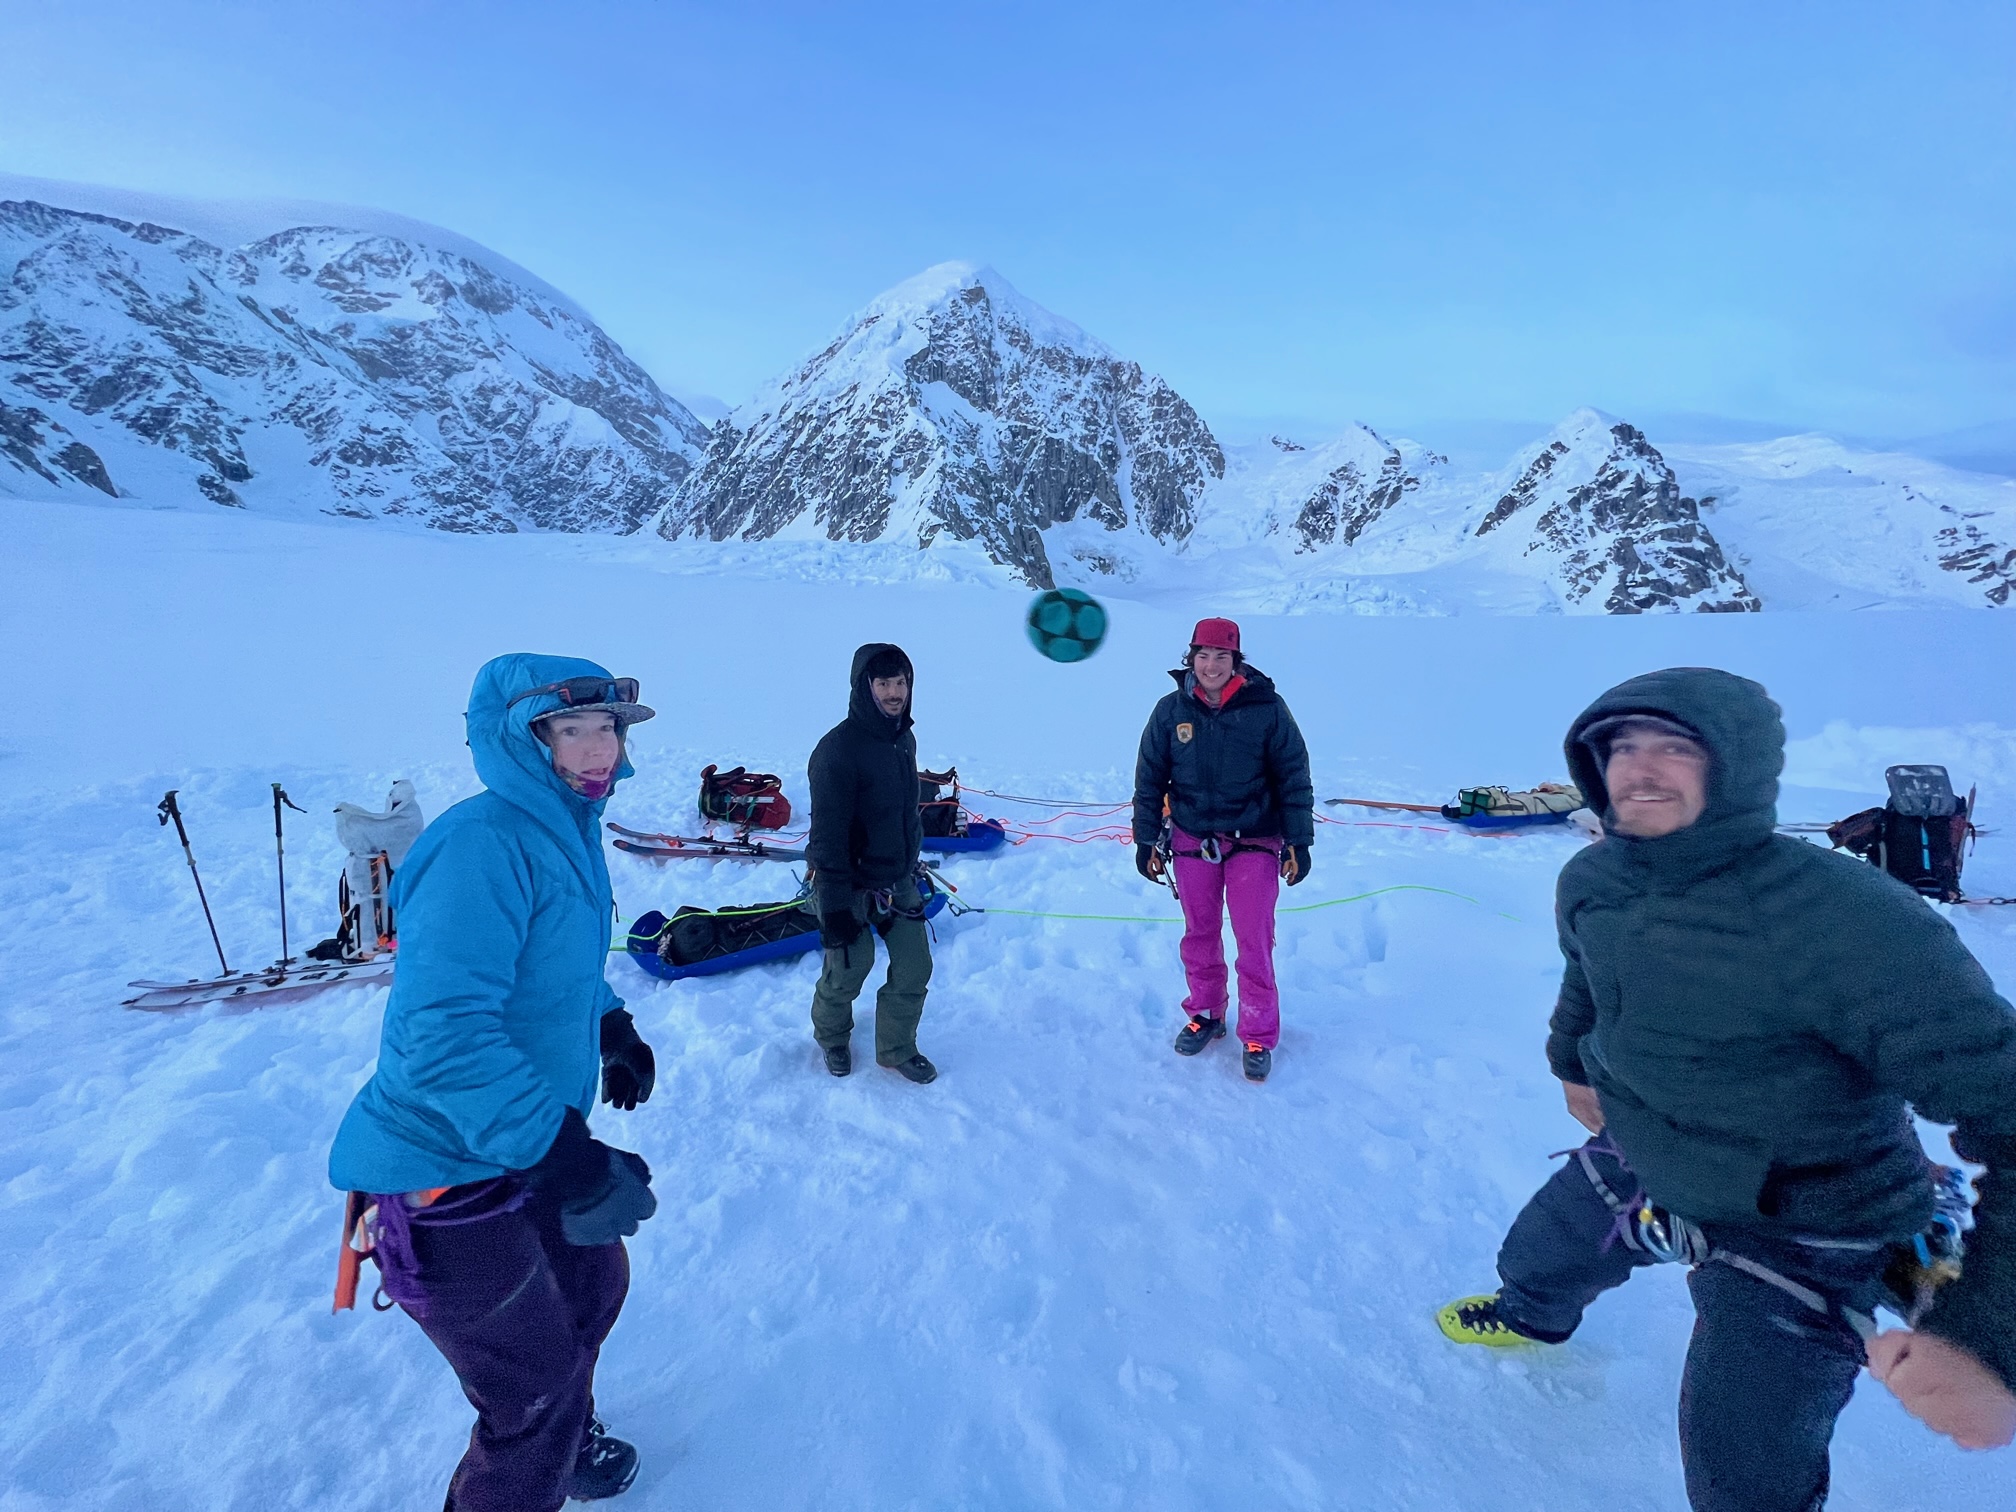 Four climbers stand on a glacier look upon a hackysack in mid-air